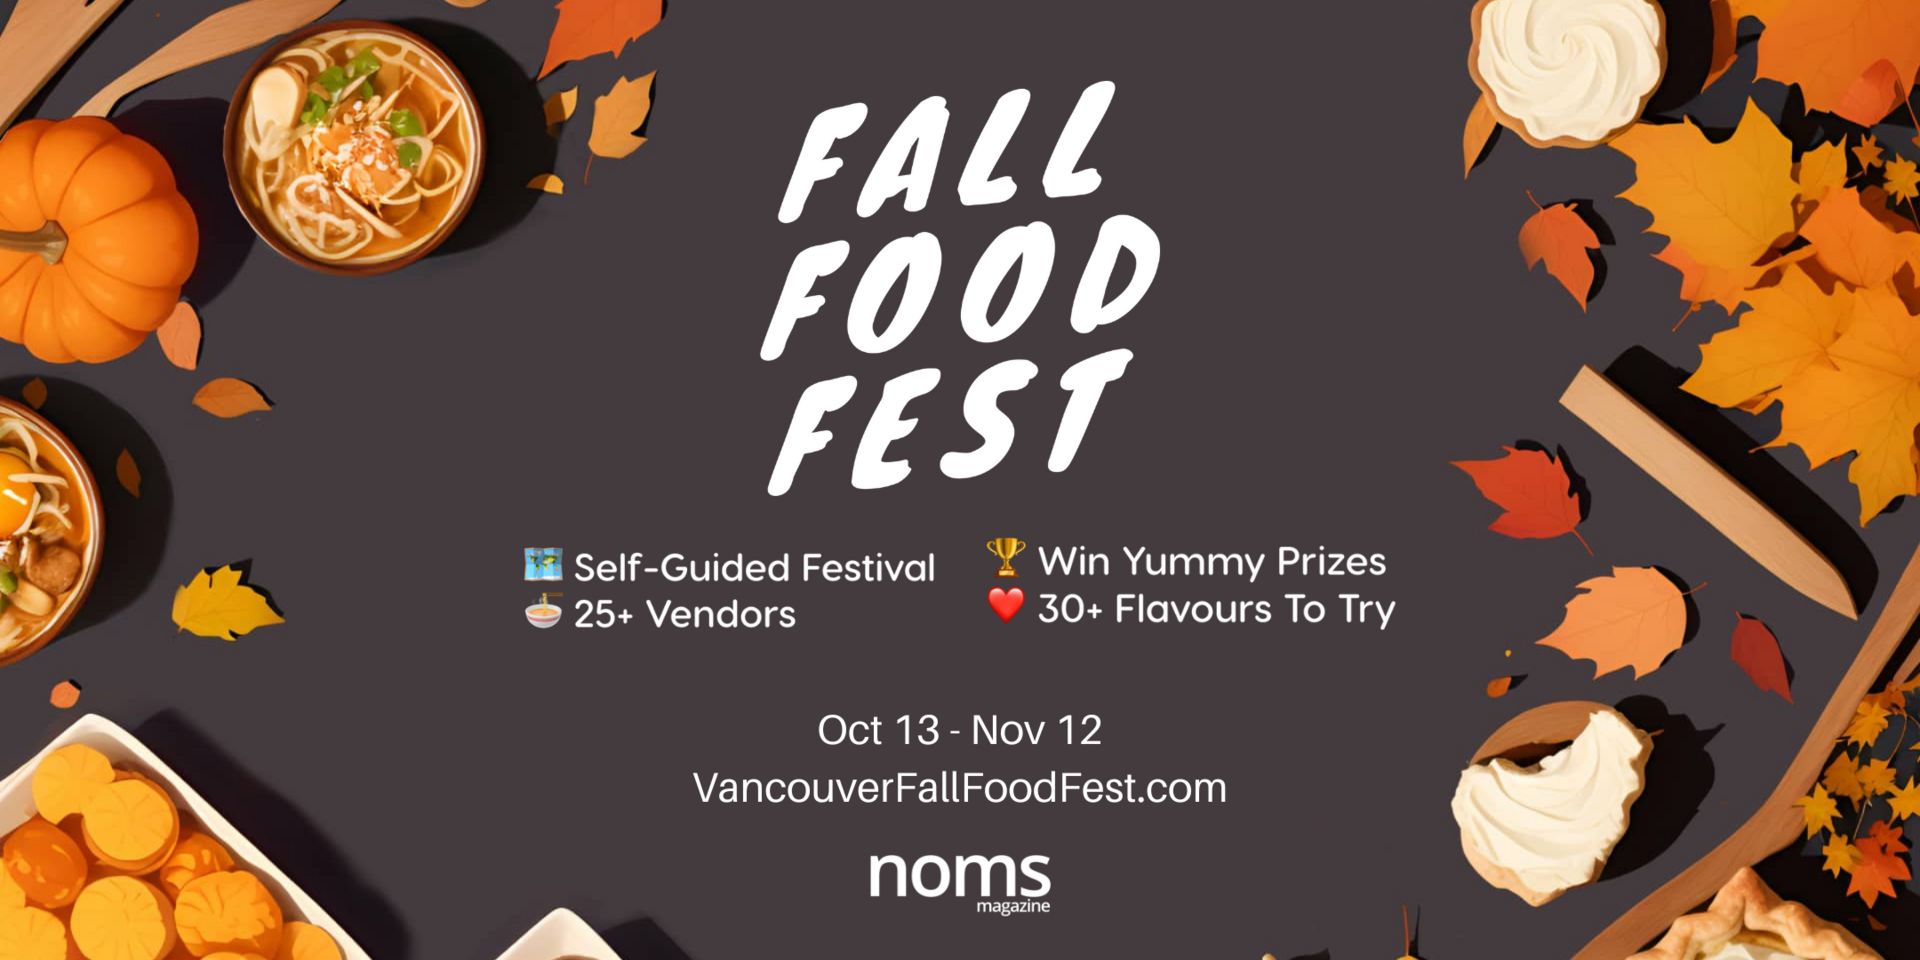 Vancouver Fall Food Festival, Vancouver, British Columbia, Canada